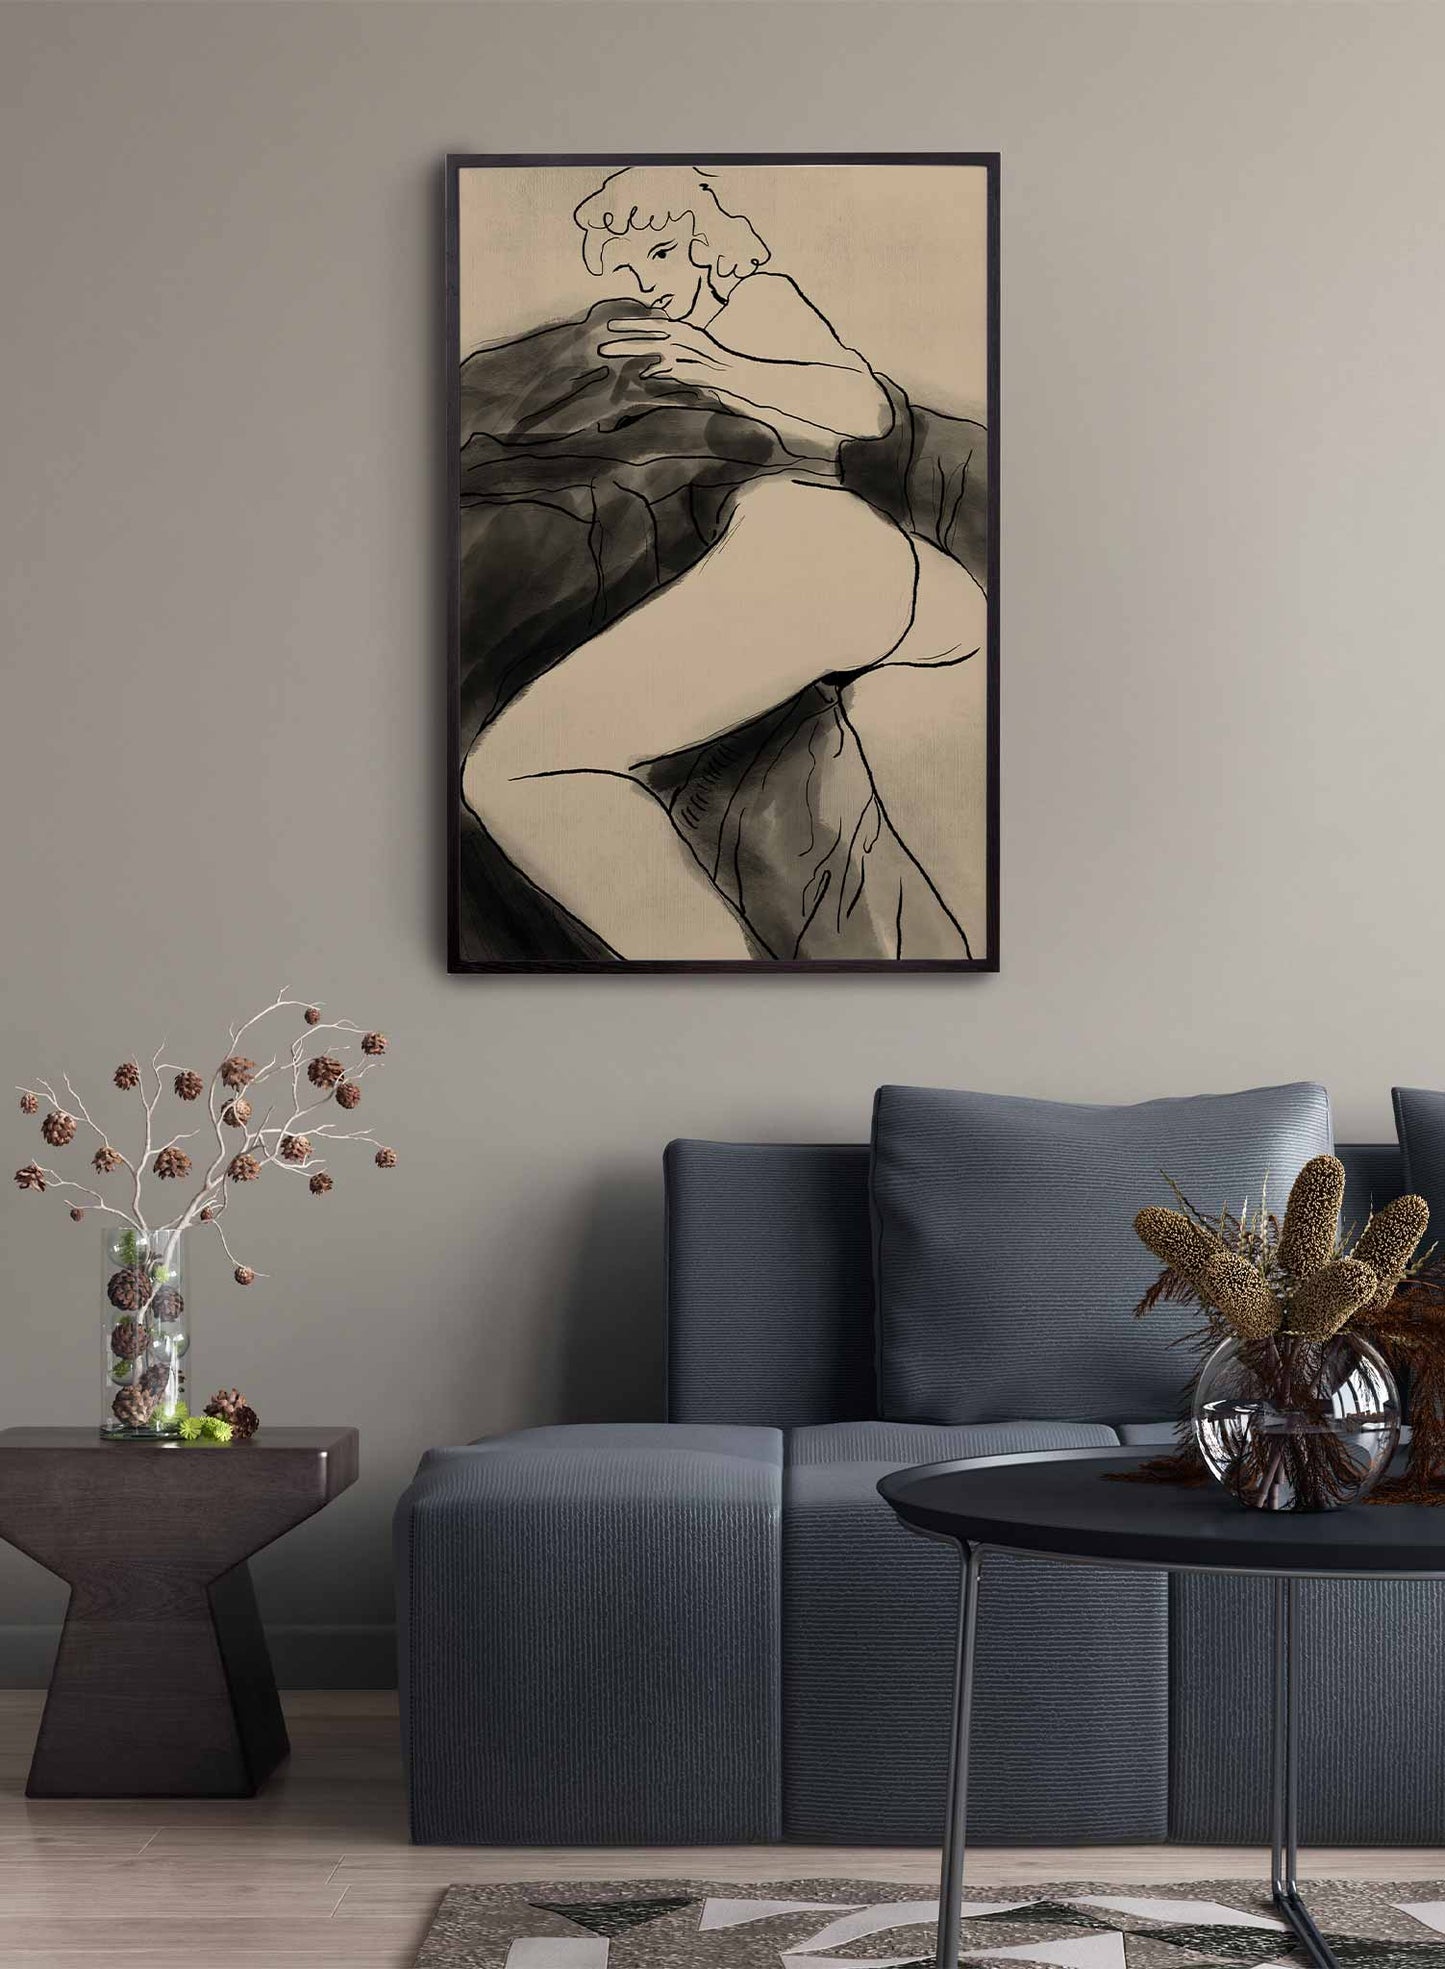 Boudoir is an illustration of a naked woman laying on her stomach in her bed sheets by Audrey Rivet in collaboration with Opposite Wall.